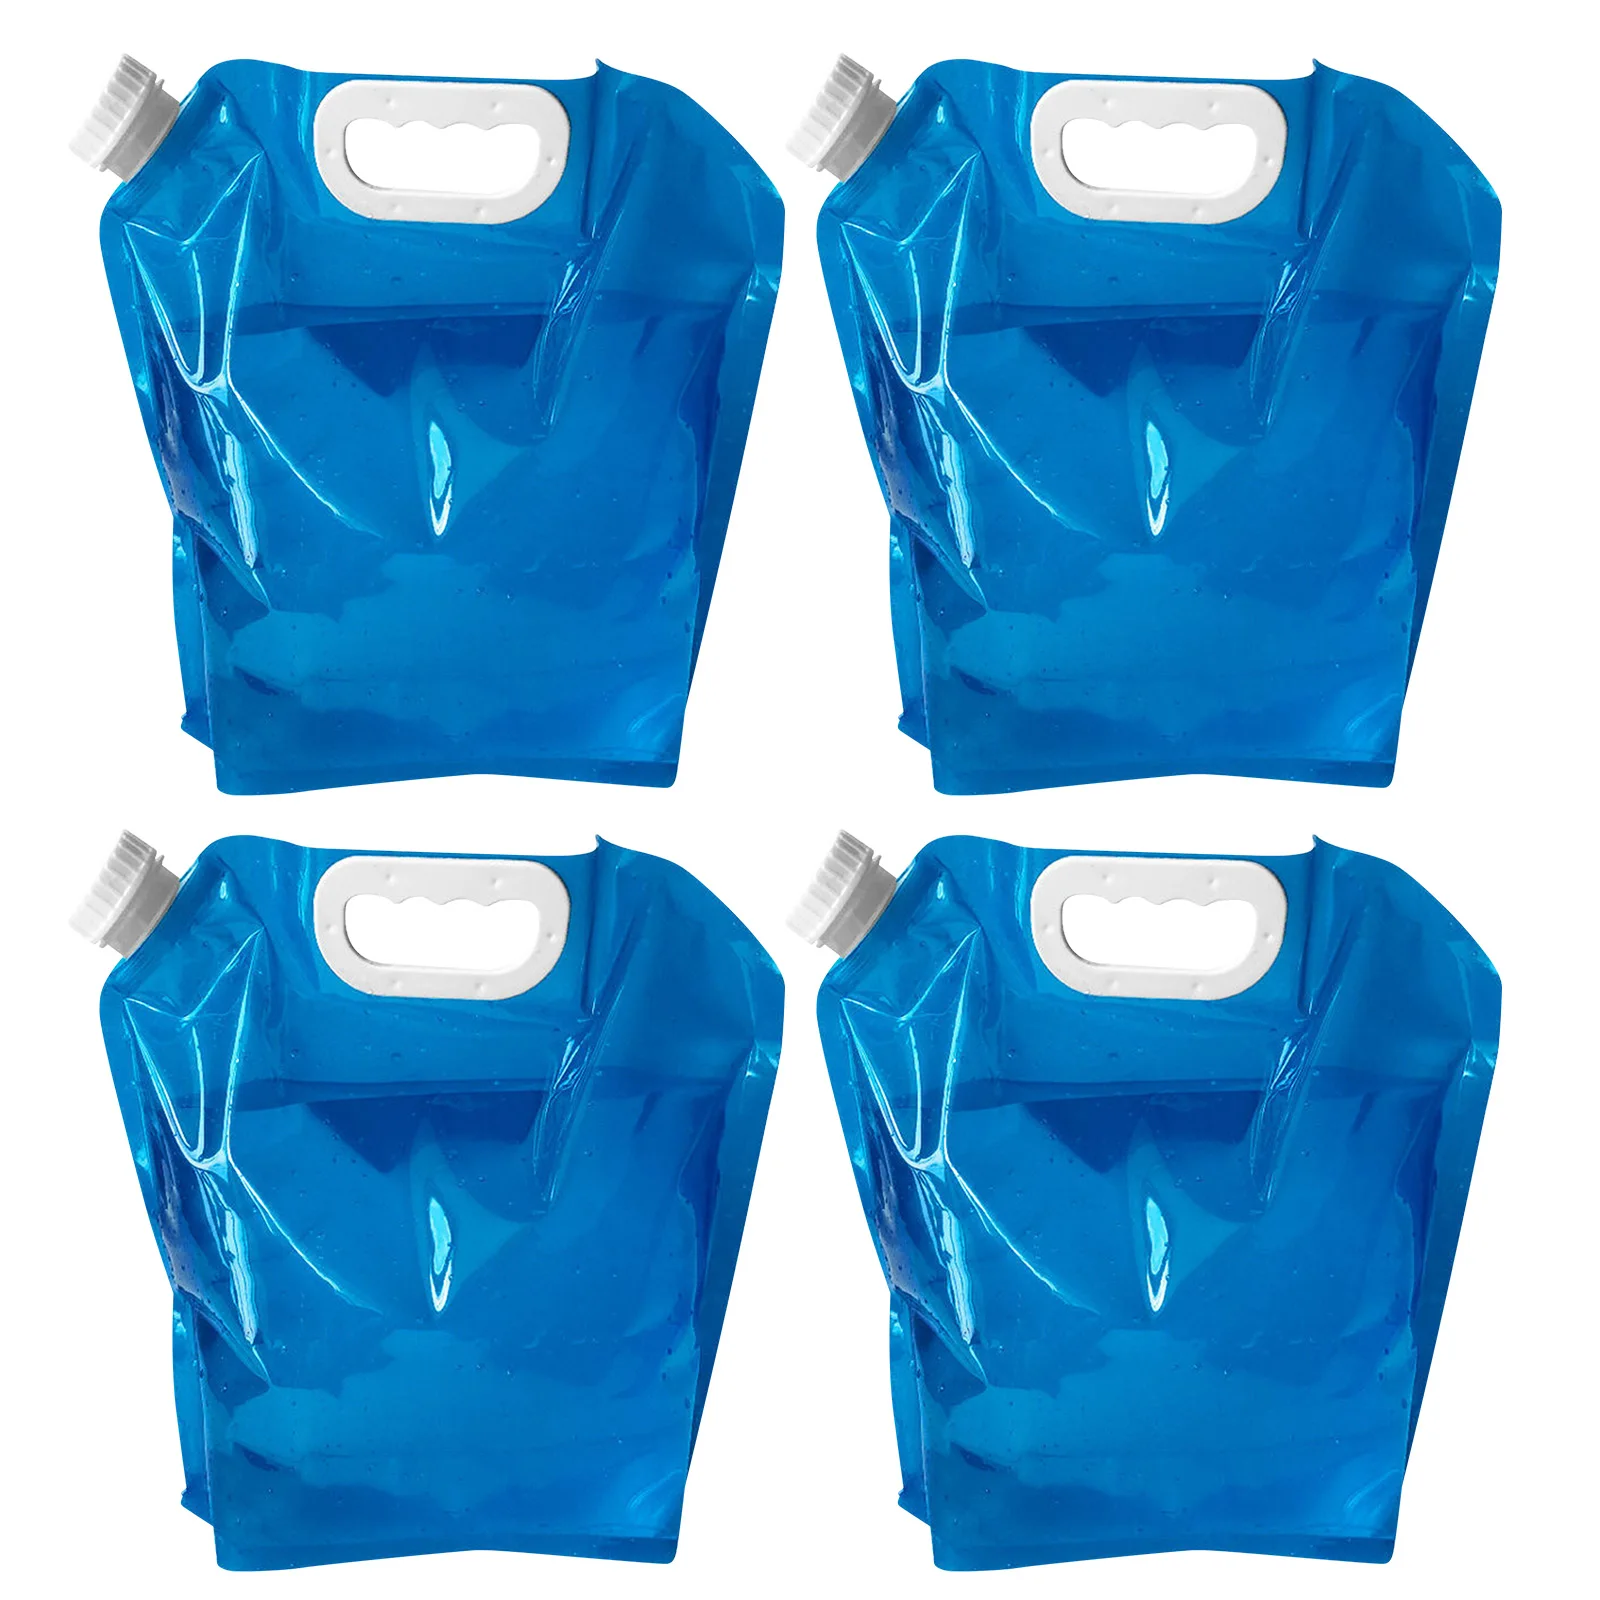 

Collapsible Water Tank Container Bag 5/10L Outdoor Folding Water Storage Carrier for Backpacking Camping Hiking Picnic BBQ